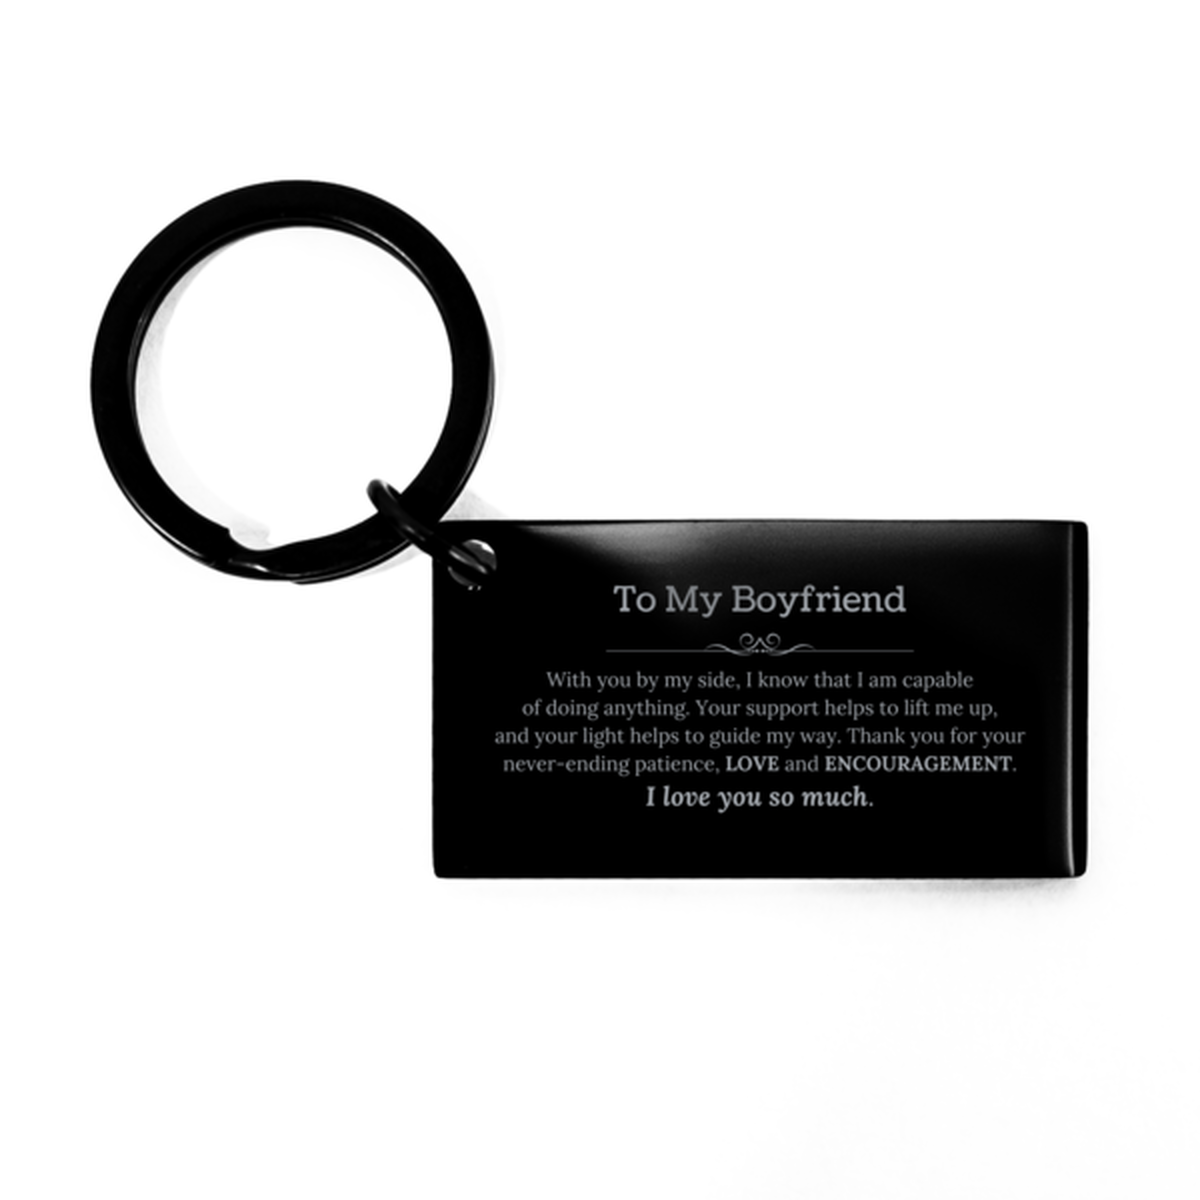 Appreciation Boyfriend Keychain Gifts, To My Boyfriend Birthday Christmas Wedding Keepsake Gifts for Boyfriend With you by my side, I know that I am capable of doing anything. I love you so much